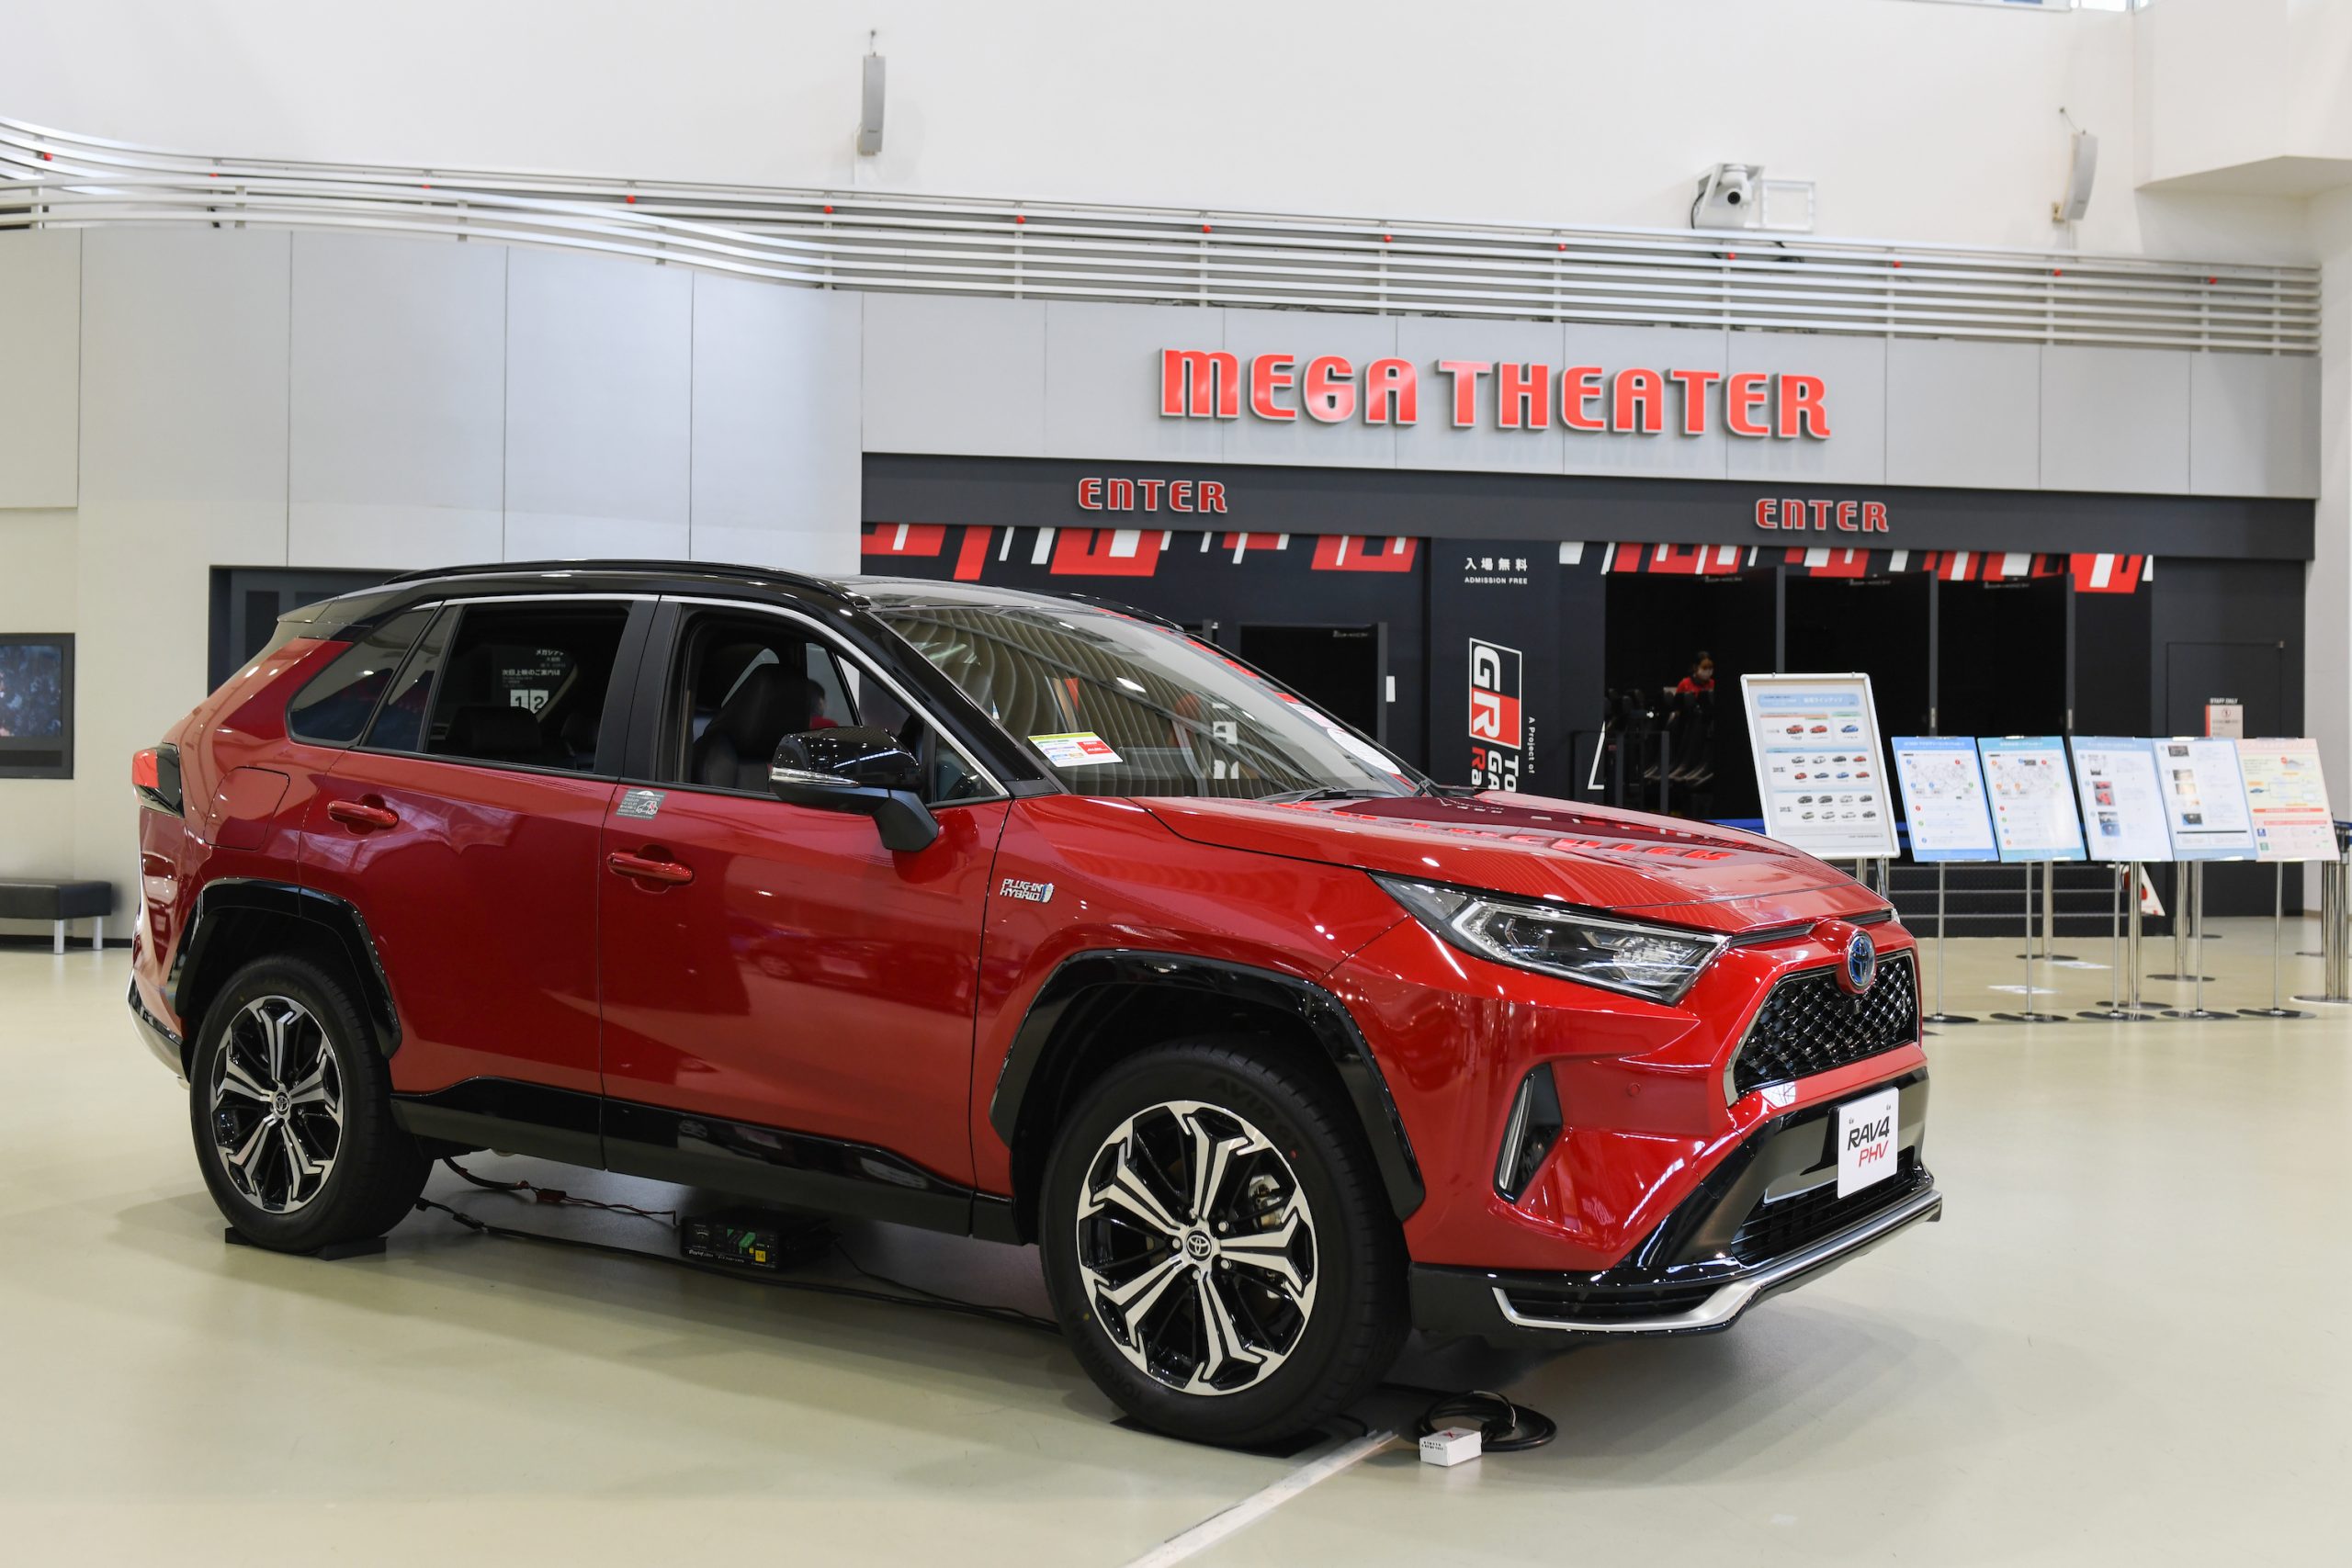 A red Toyota Motor Corp. RAV4 plug-in hybrid sports utility vehicle (SUV) stands on display at the Toyota Mega Web showroom in Tokyo, Japan